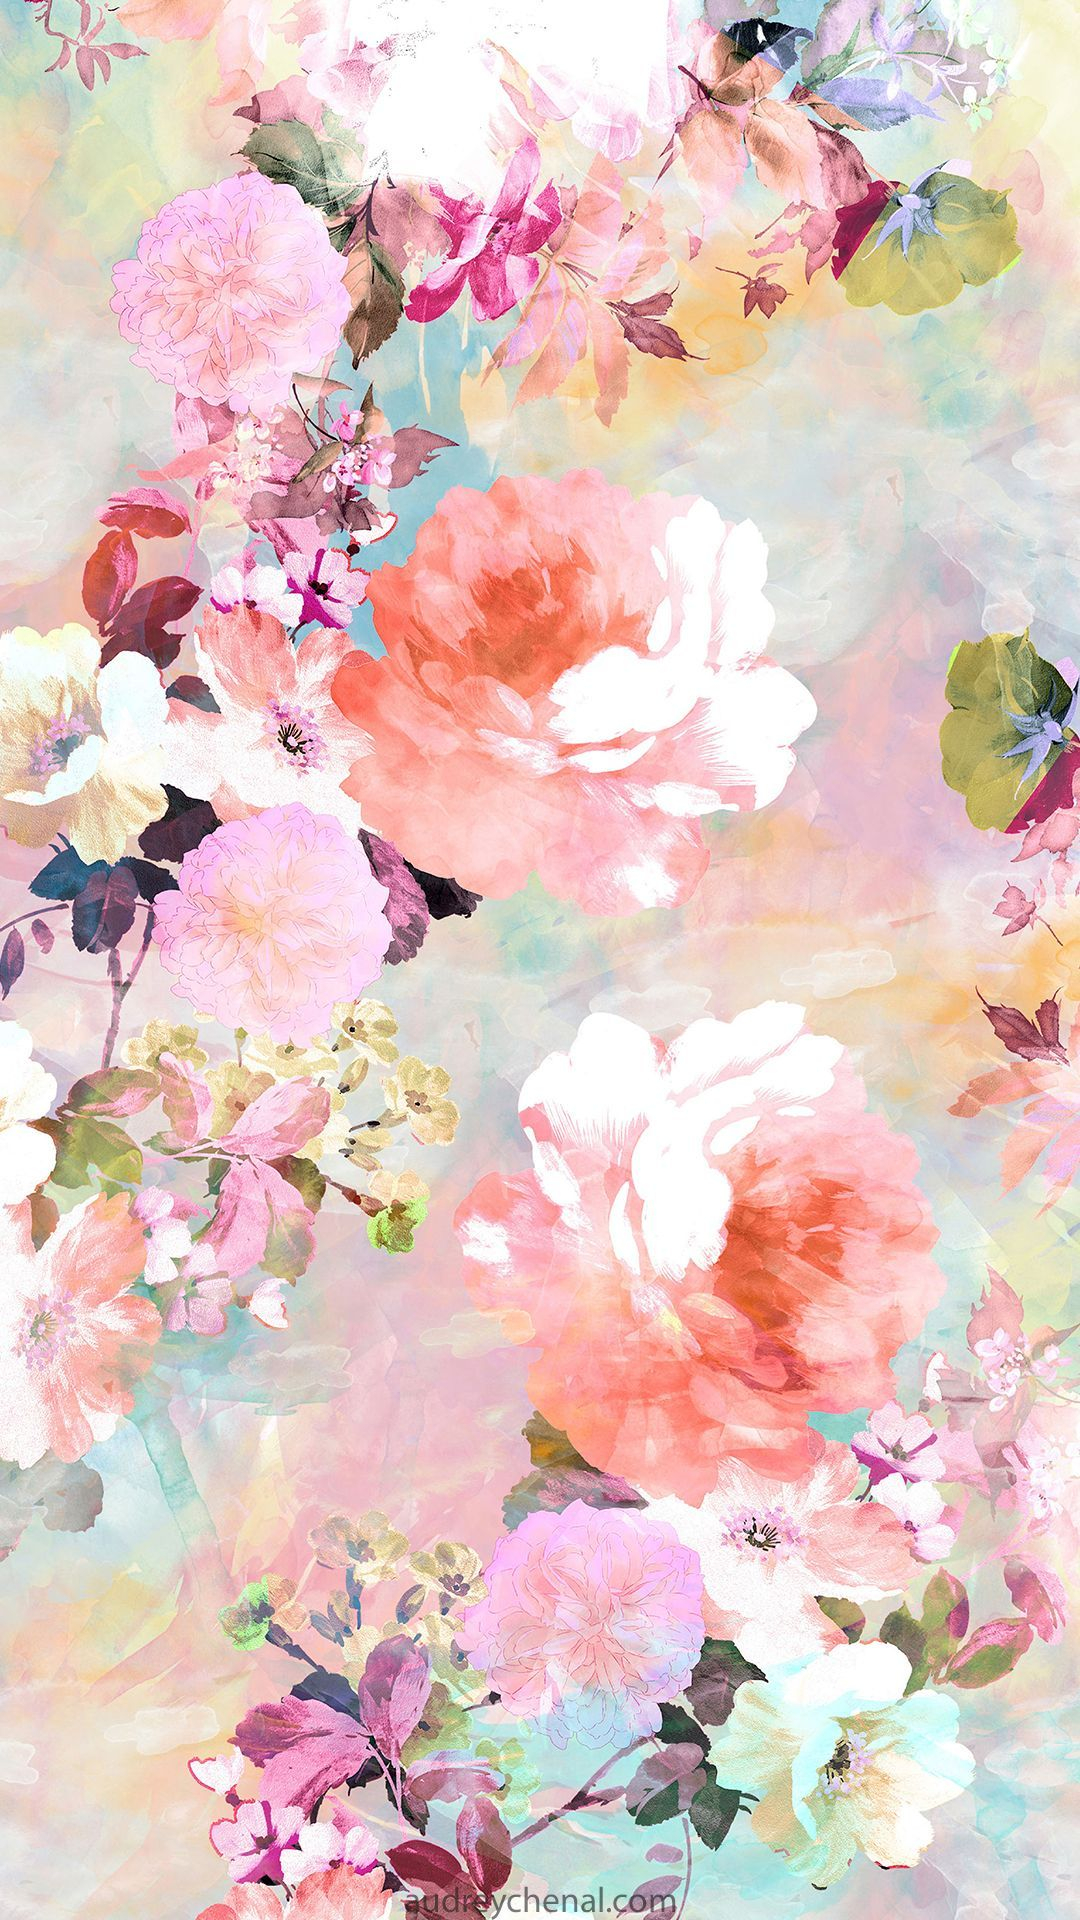 1080x1920 Pastel Watercolor Floral Wallpapers Top Free Pastel Watercolor Floral Backgrounds